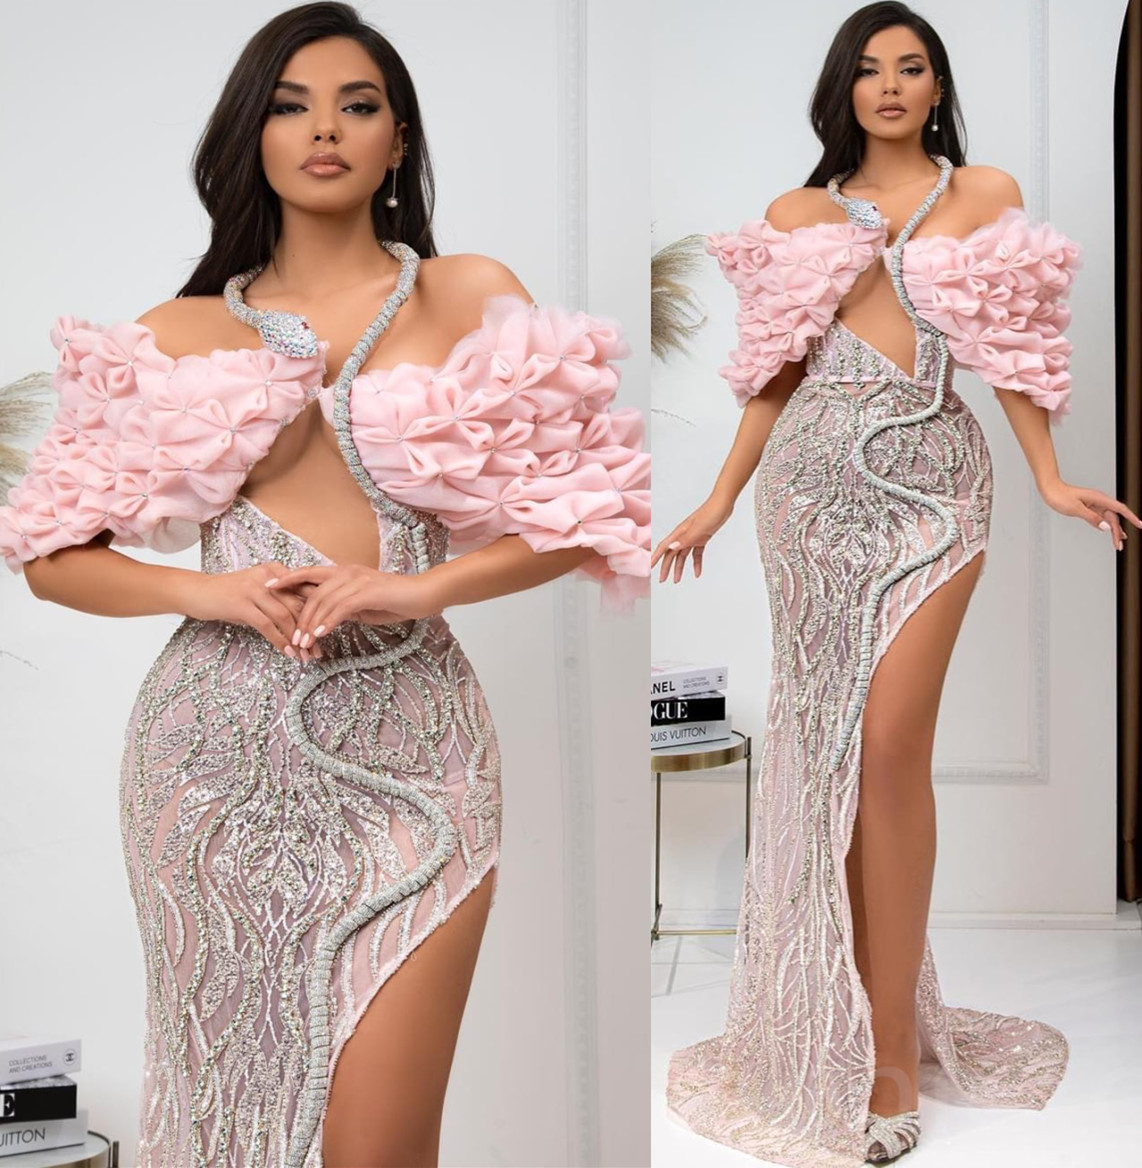 

2023 May Aso Ebi Pink Mermaid Prom Dress Beaded Crystals Sexy Evening Formal Party Second Reception Birthday Engagement Gowns Dress Robe De Soiree ZJ319, Same as image